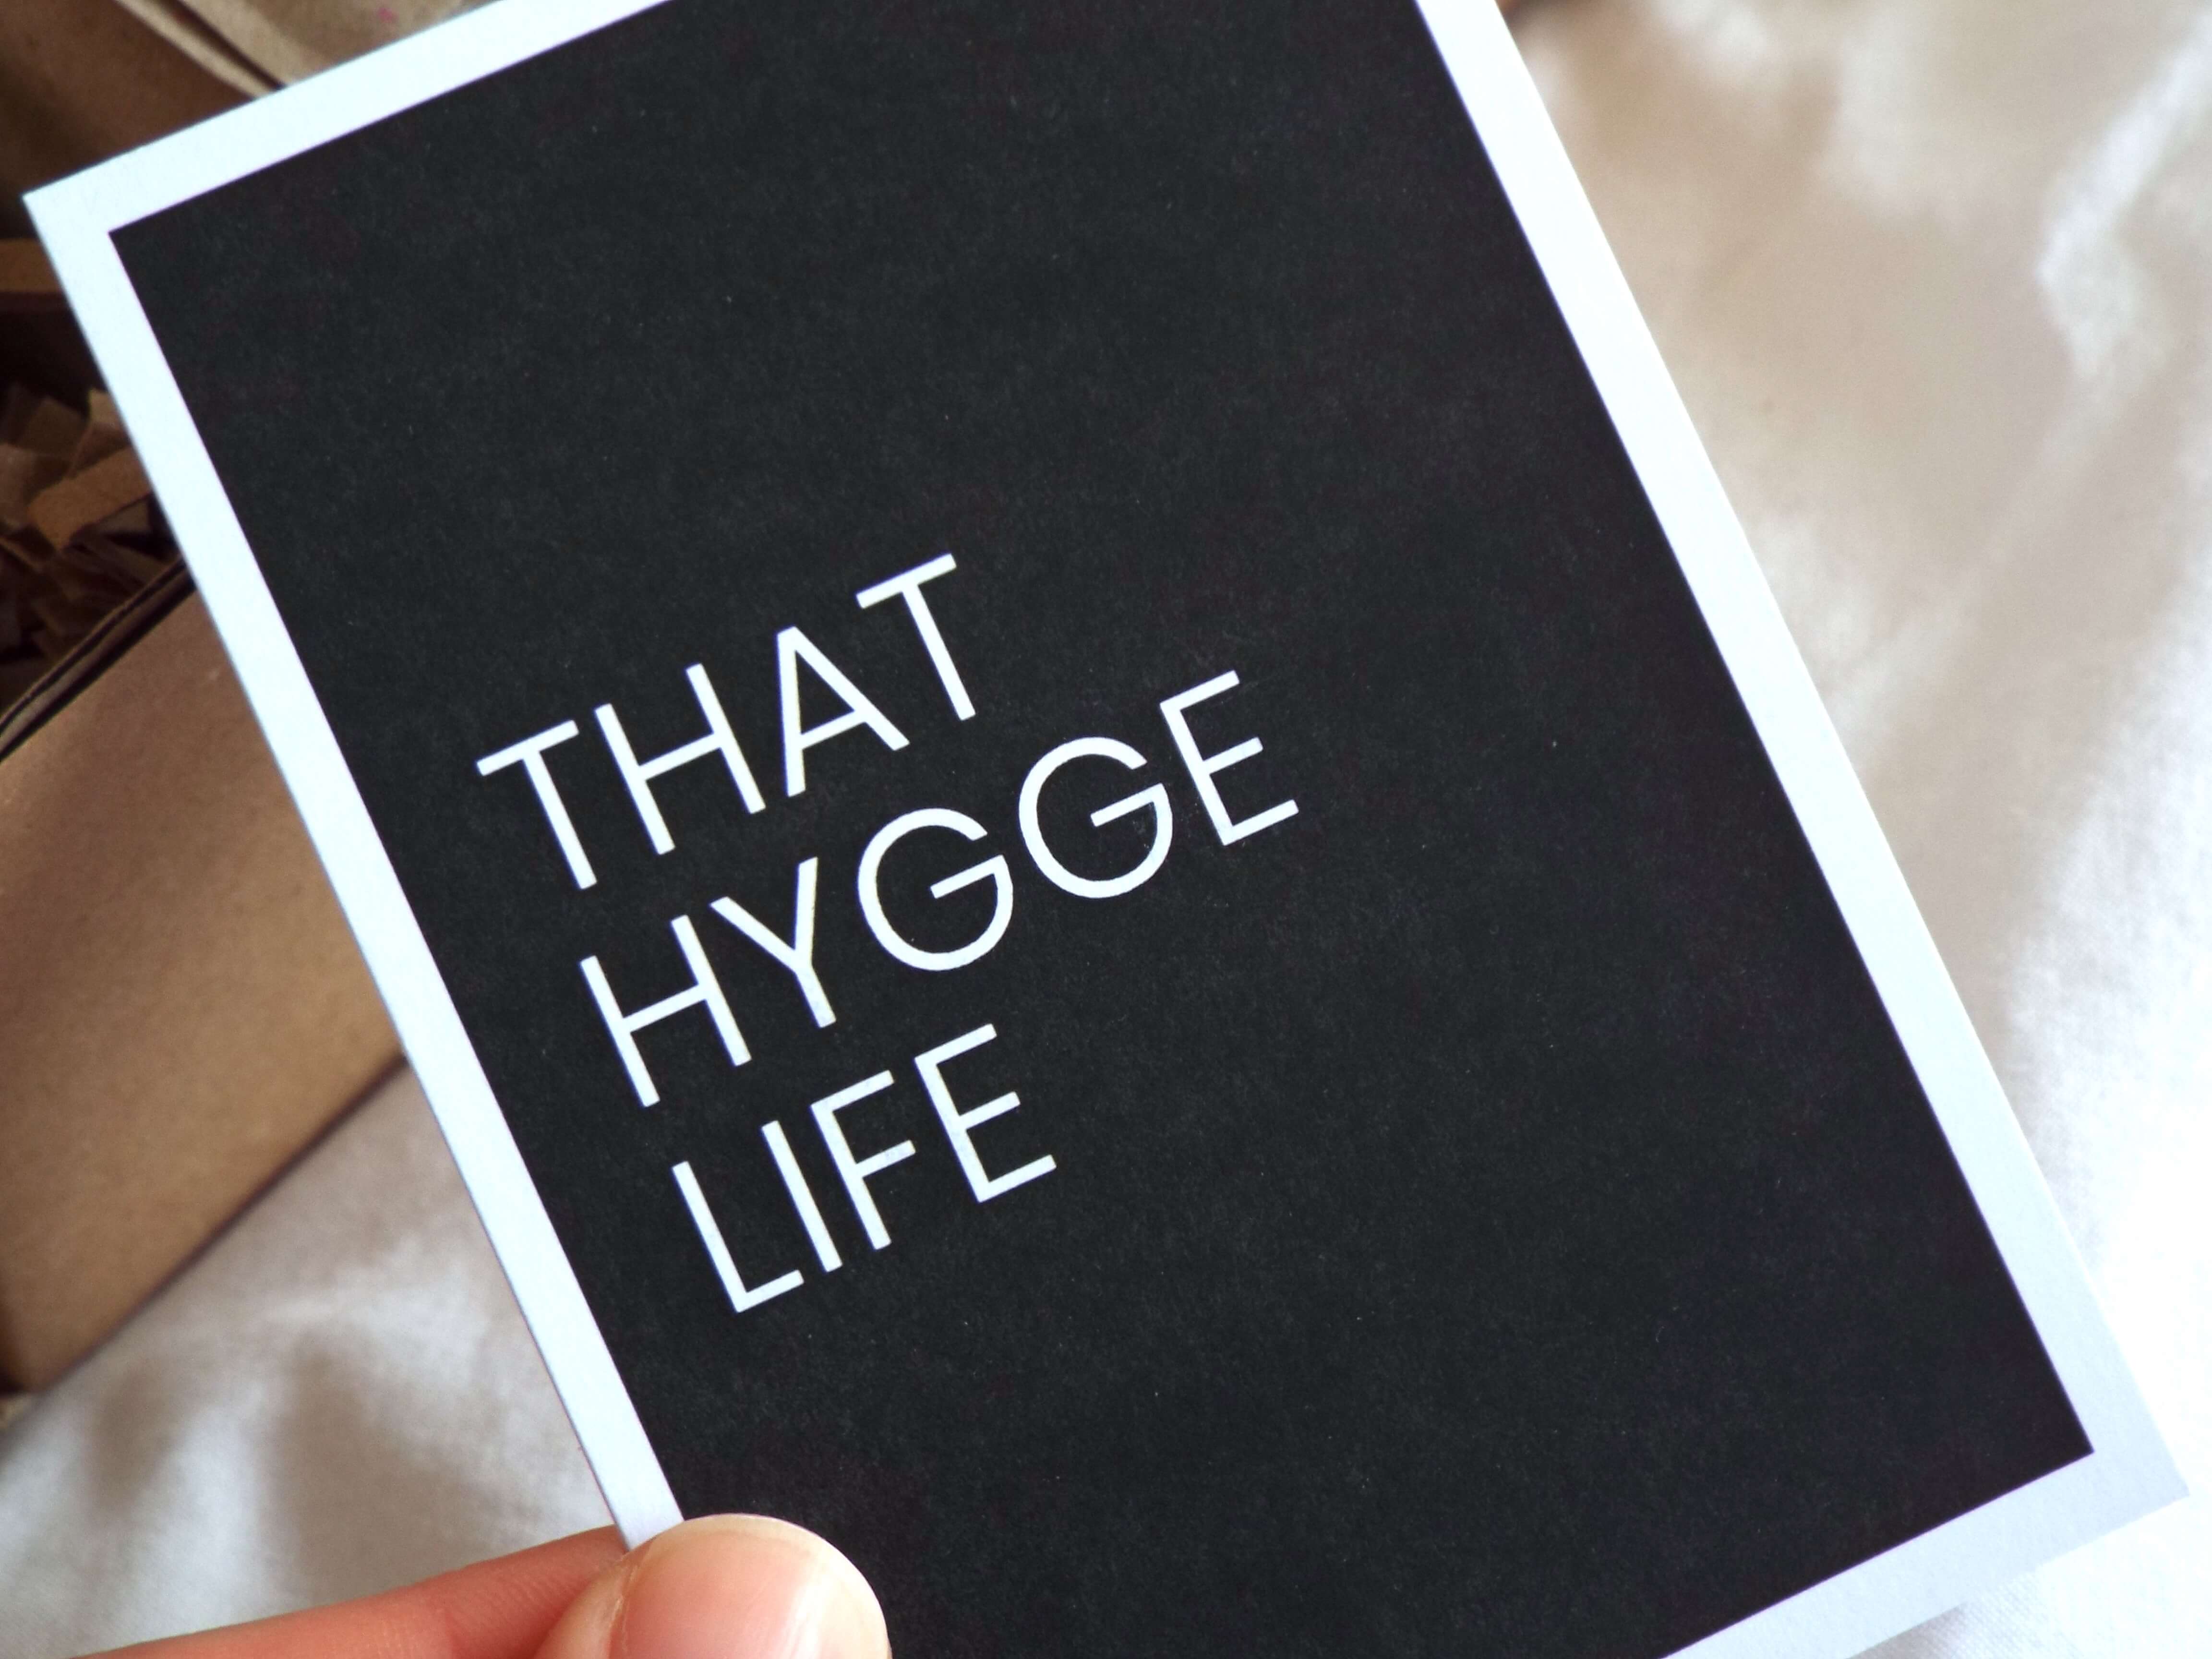 That Hygge Life black and white quote card held between two finger, close up shot.